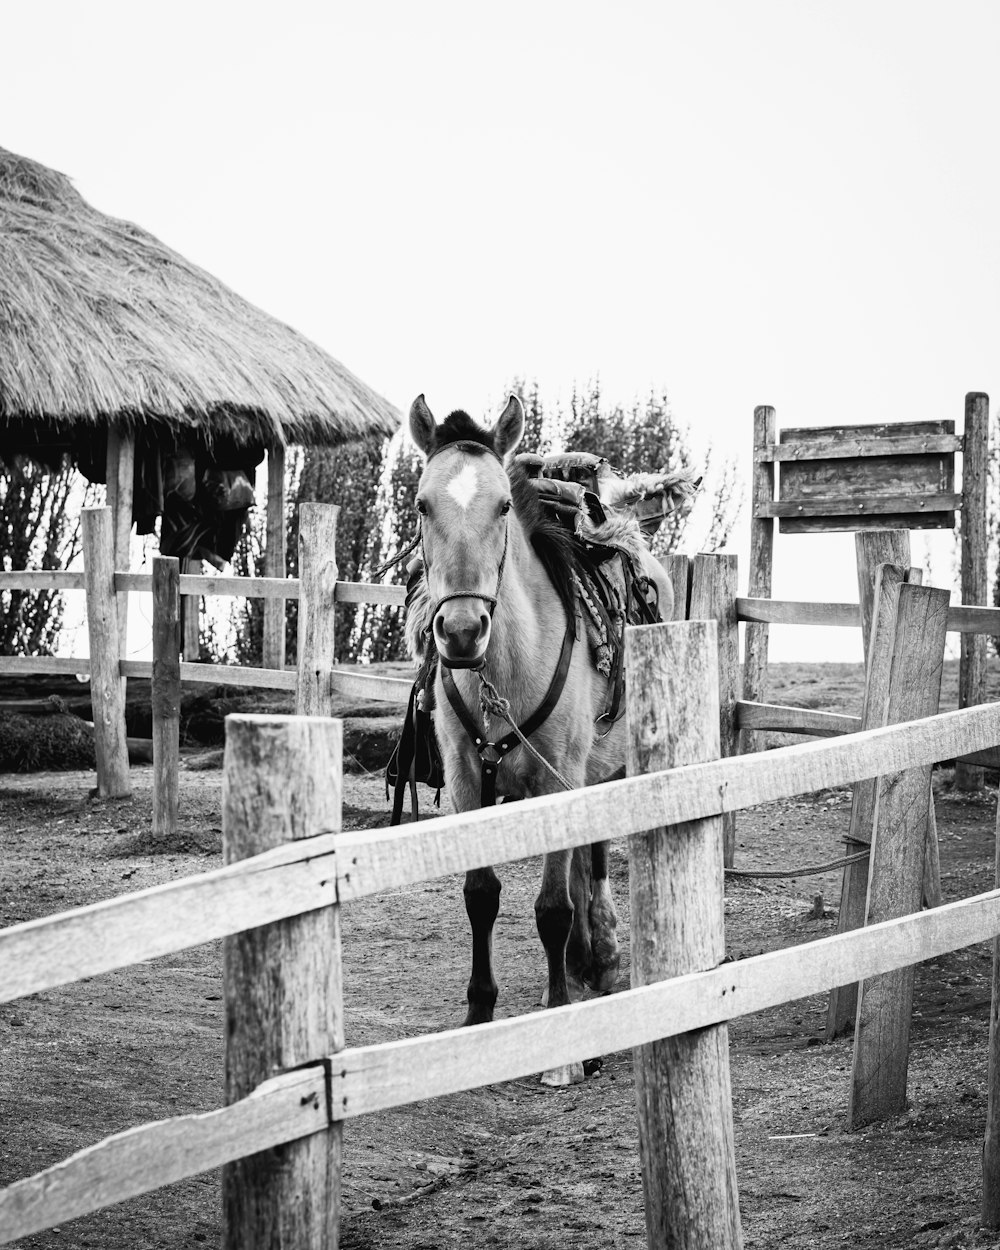 grayscale photo of 2 horses on wooden fence